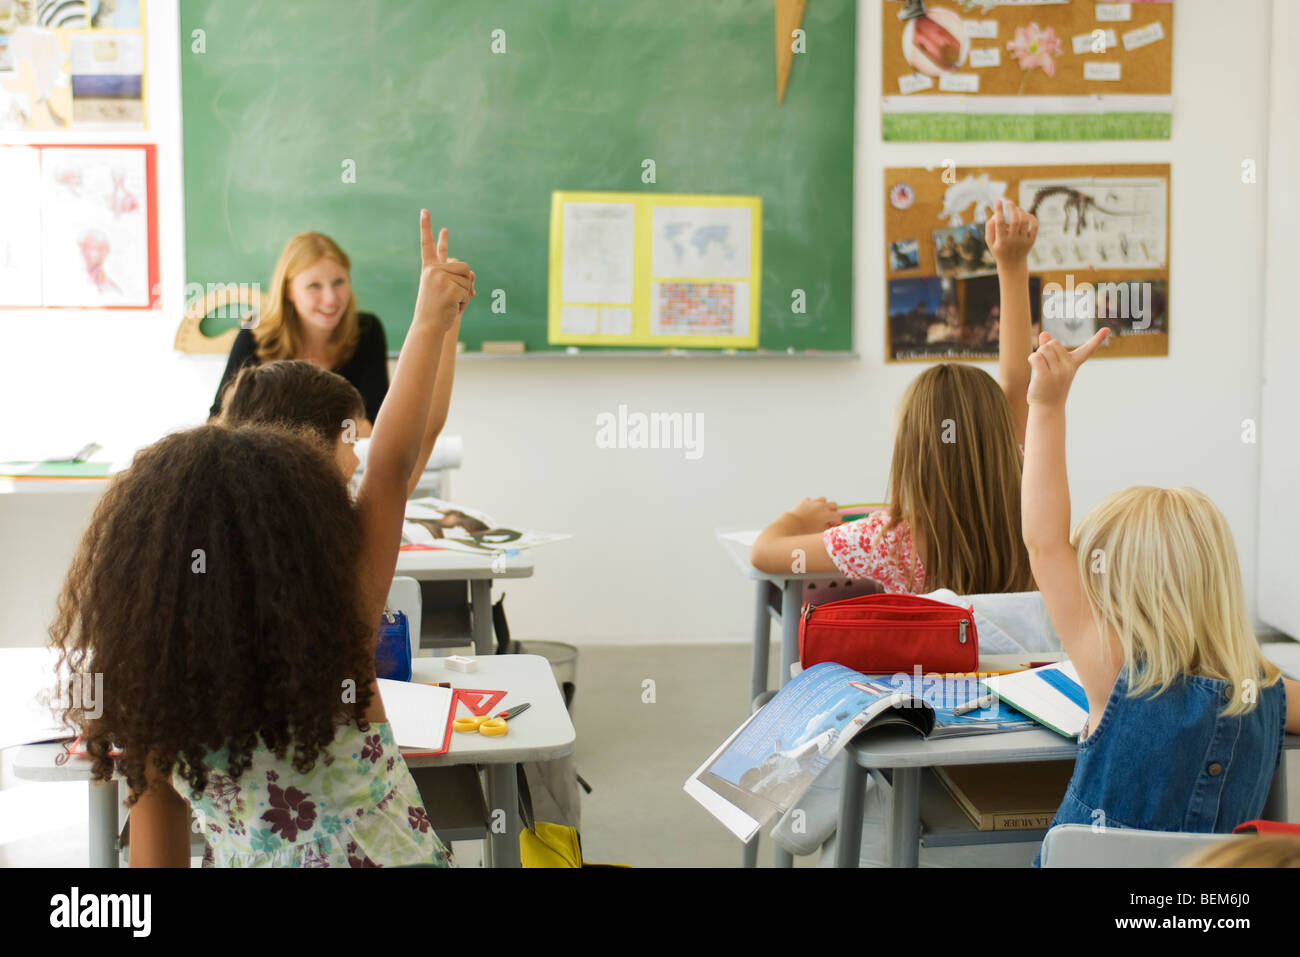 Elementary students in classroom raising hands, rear view Stock Photo